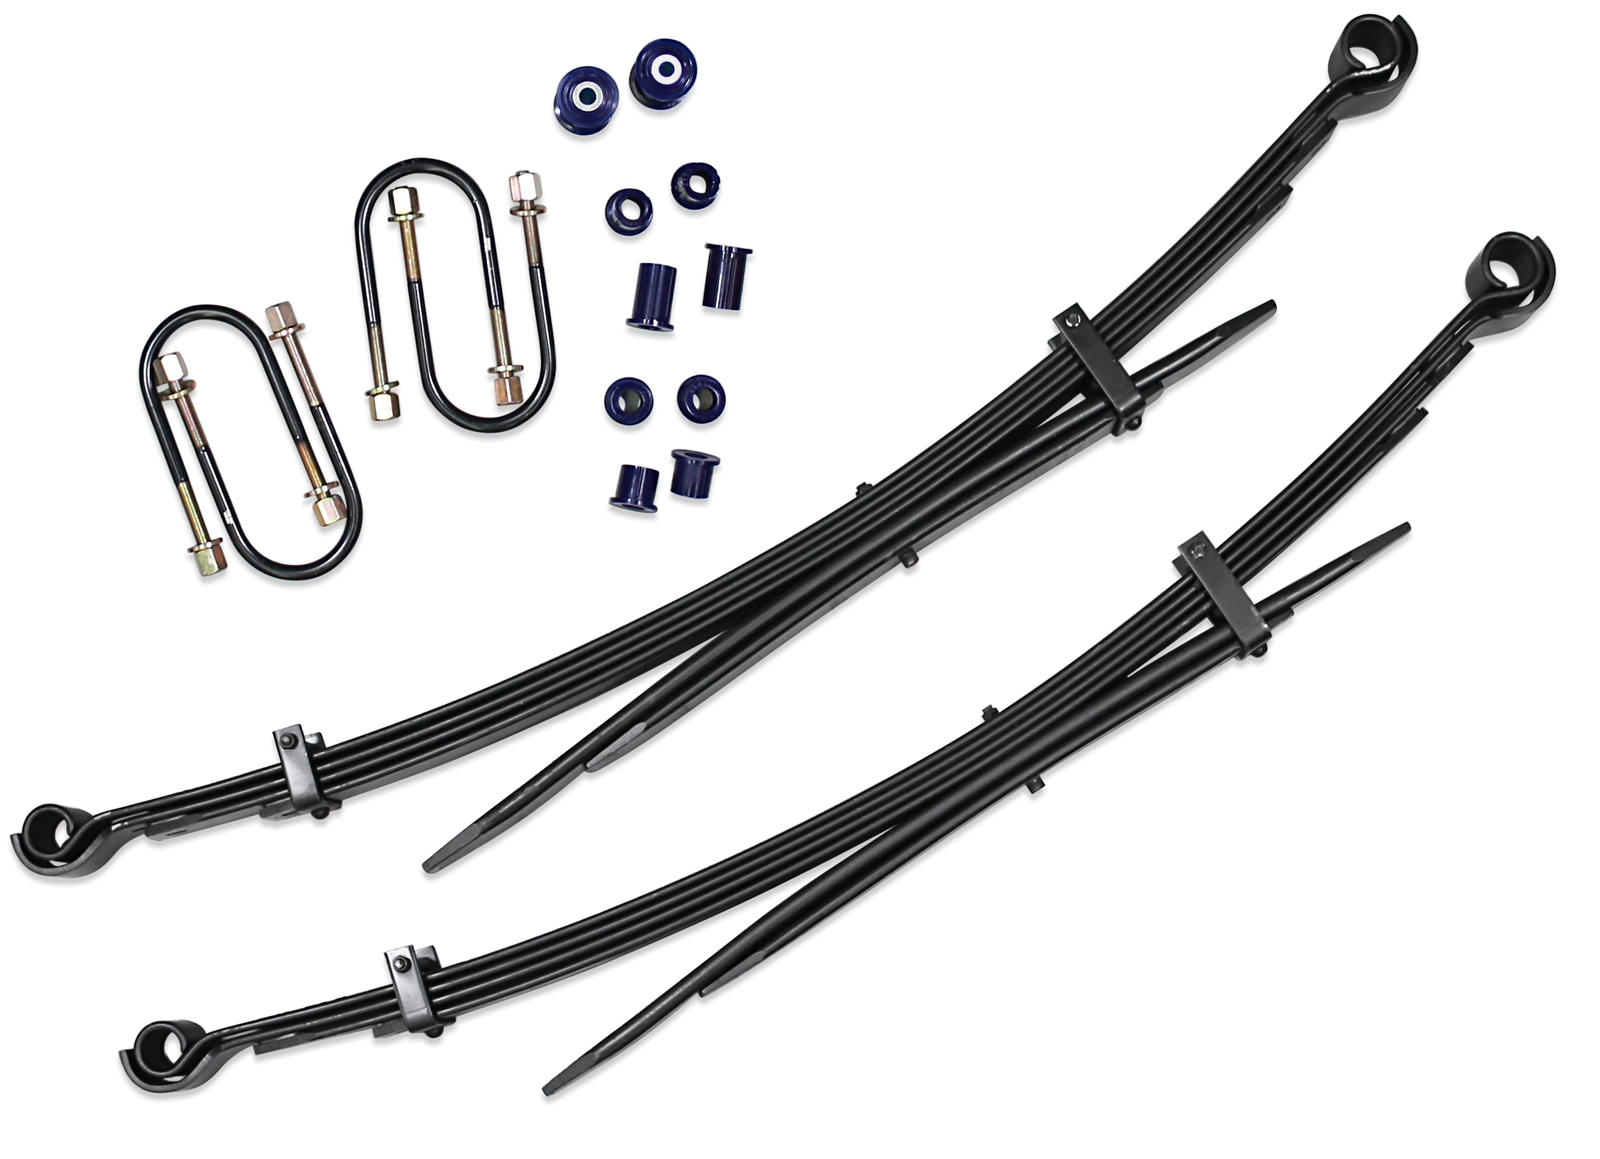 Formula Leaf Spring Kit - 40mm Lift at 300kg to suit GWM Ute/Cannon - 2020-on